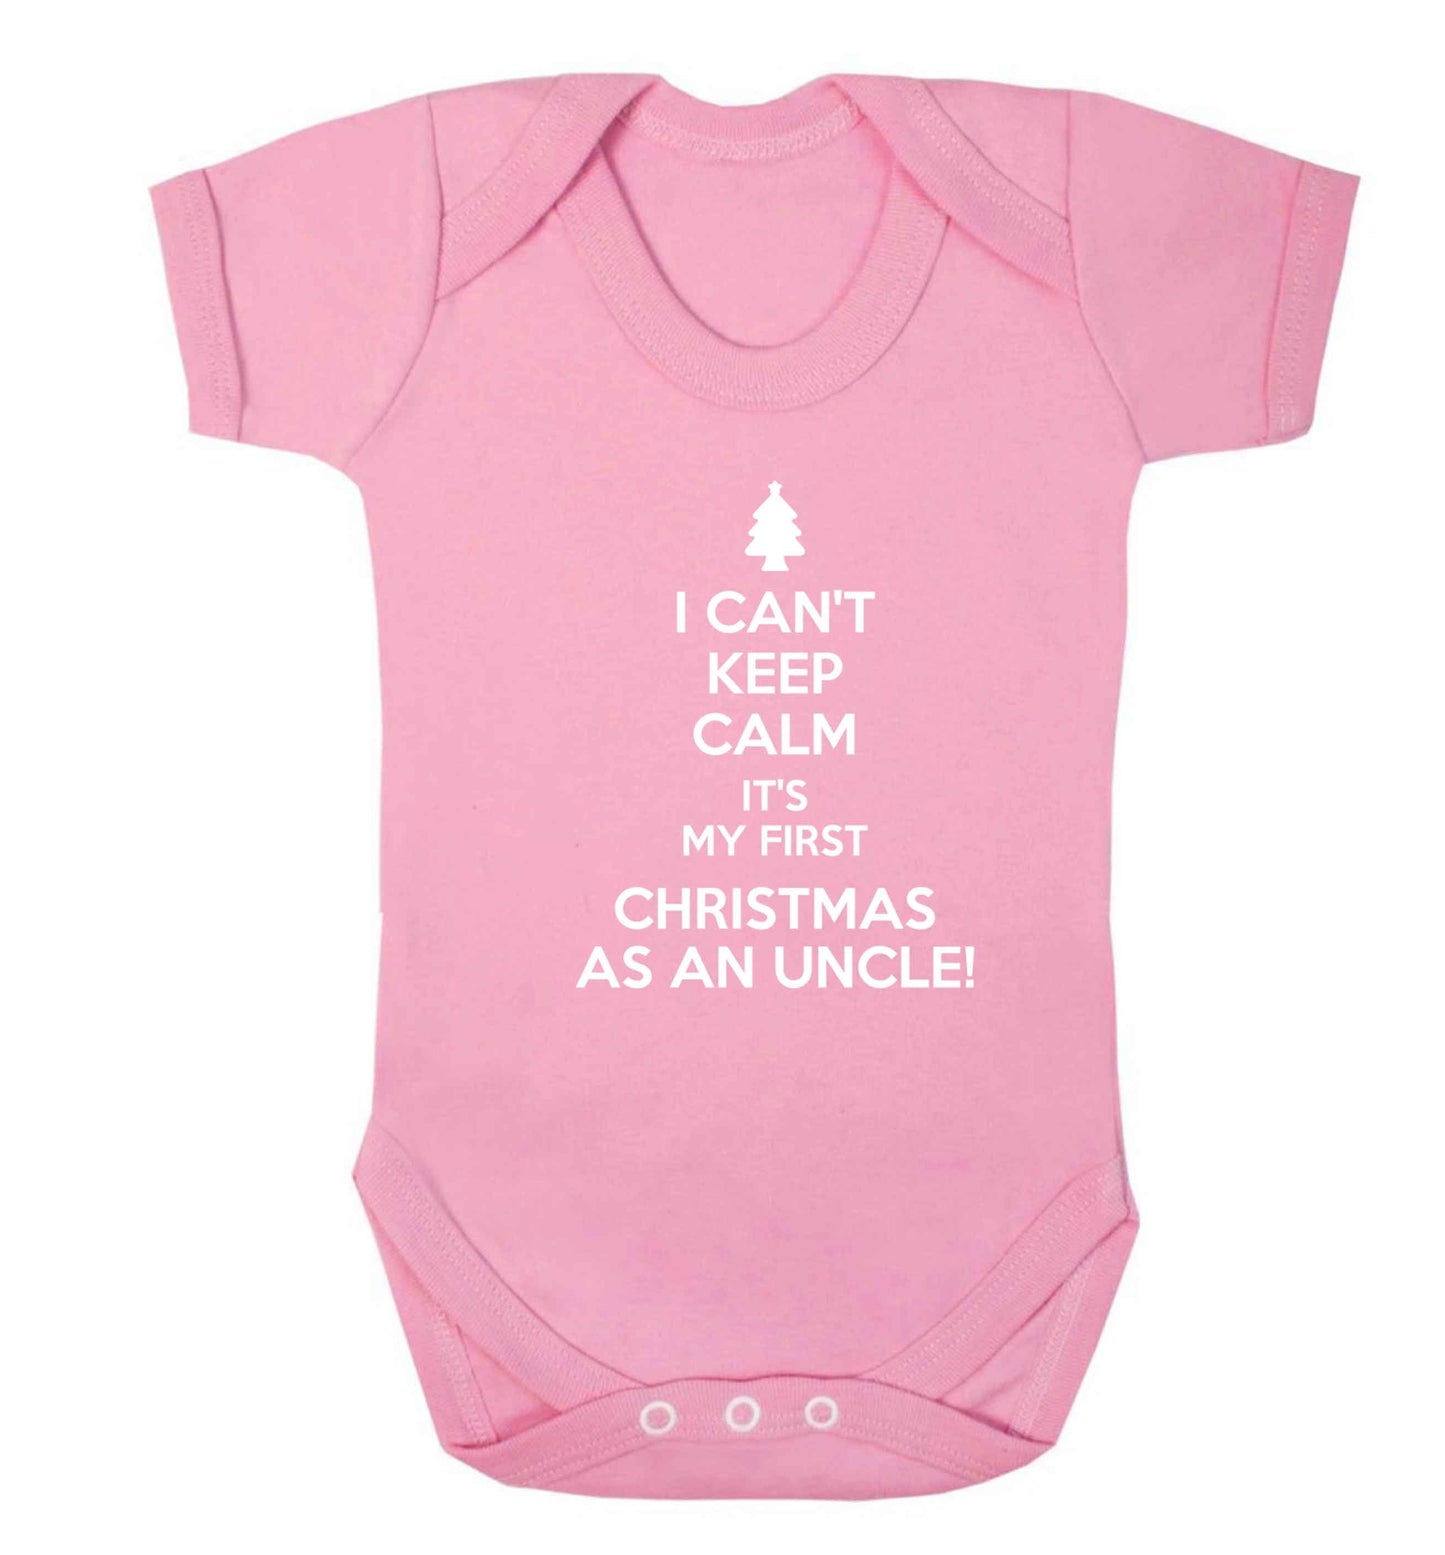 I can't keep calm it's my first Christmas as an uncle! Baby Vest pale pink 18-24 months